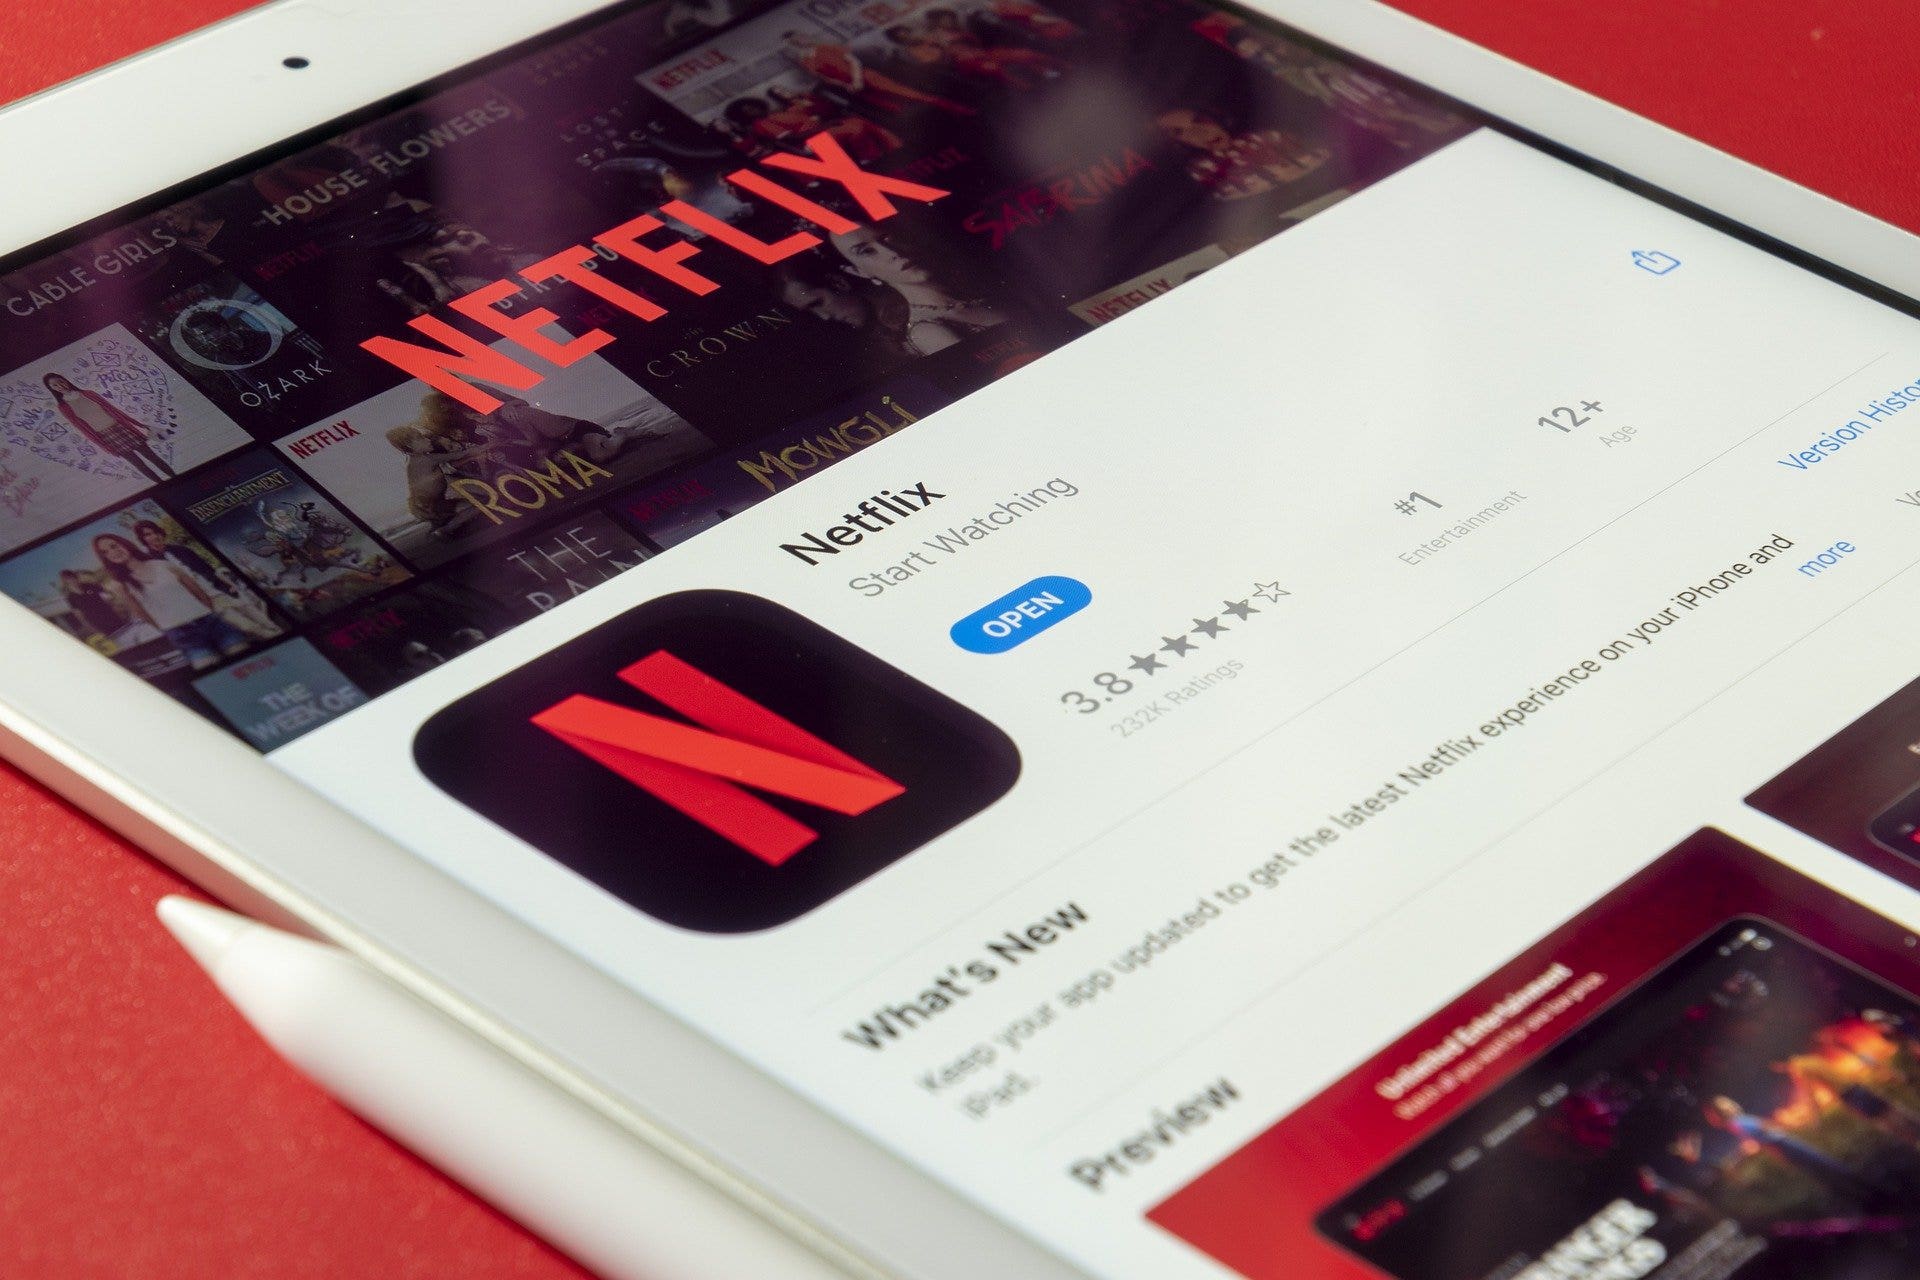 Netflix Ad-Supported Subscription May Deprive Users The Option To Download For Offline Viewing: Report